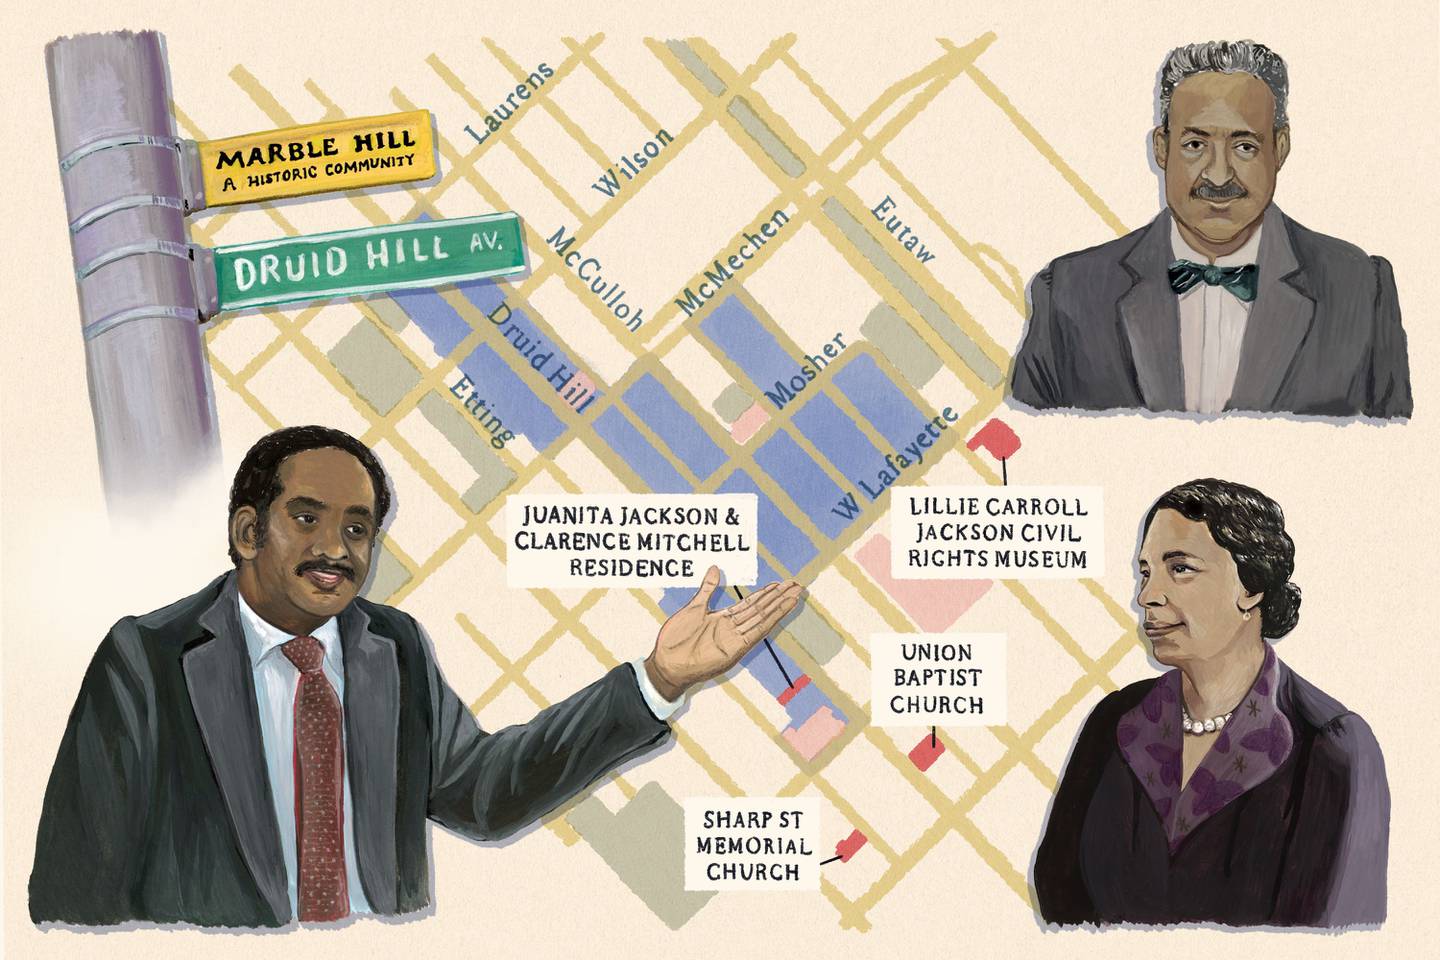 Illustration of Marble Hill historic street sign, Clarence Mitchell, Lillie Carroll Jackson and Thurgood Marshall, with map of Marble Hill neighborhood in background.